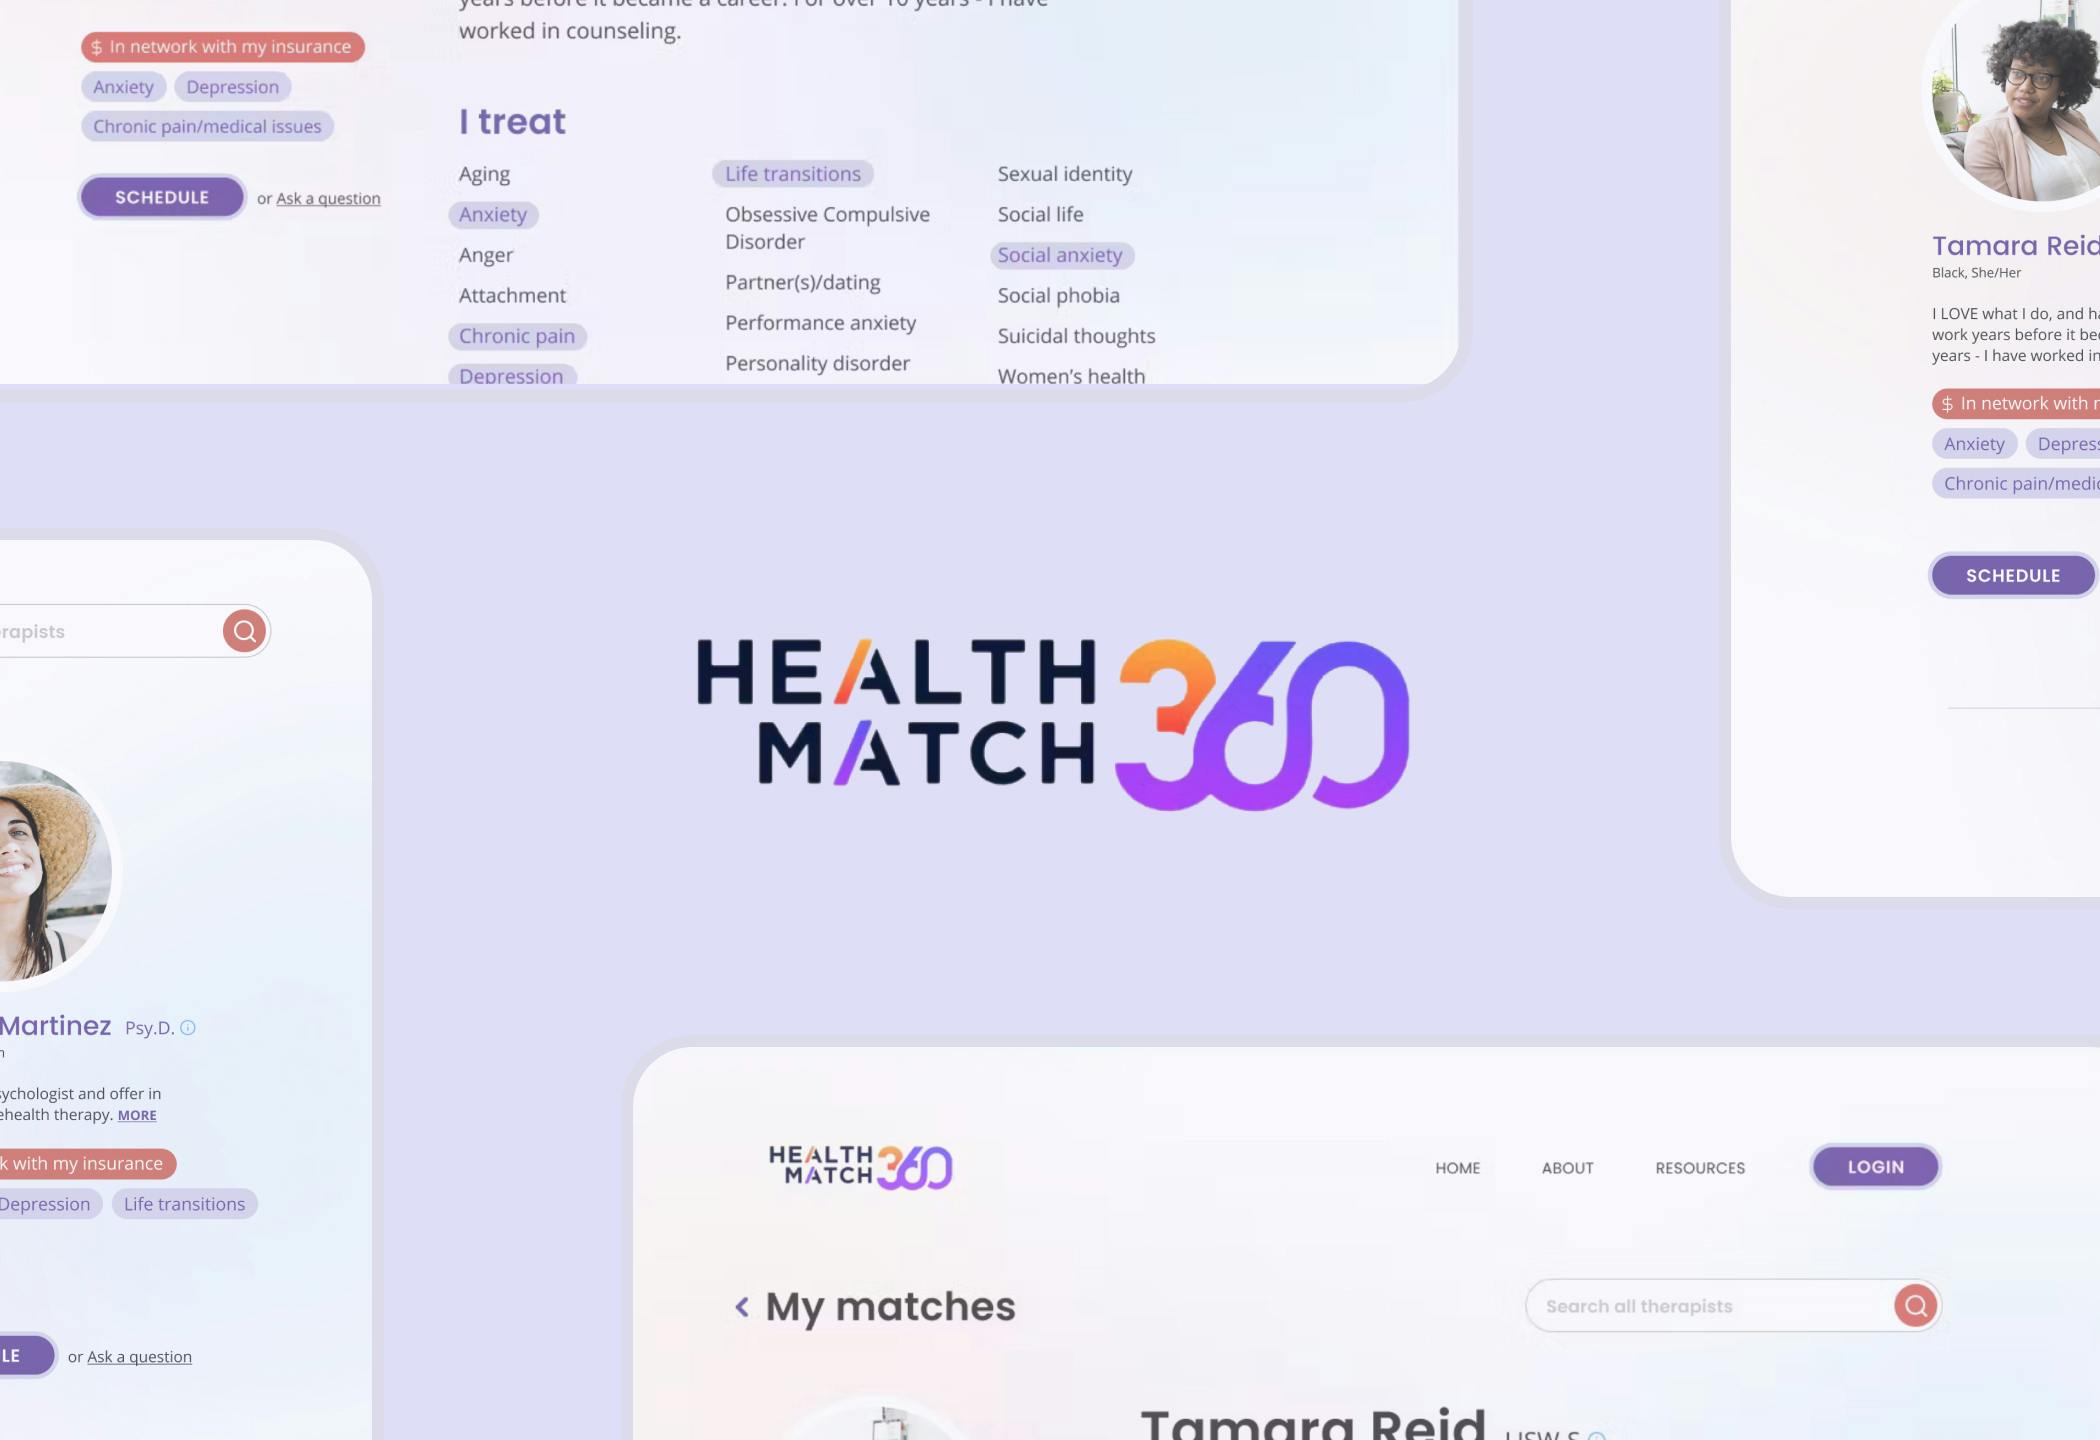 Health Match 360 logo surrounded by four screenshots of the application that are cut off.